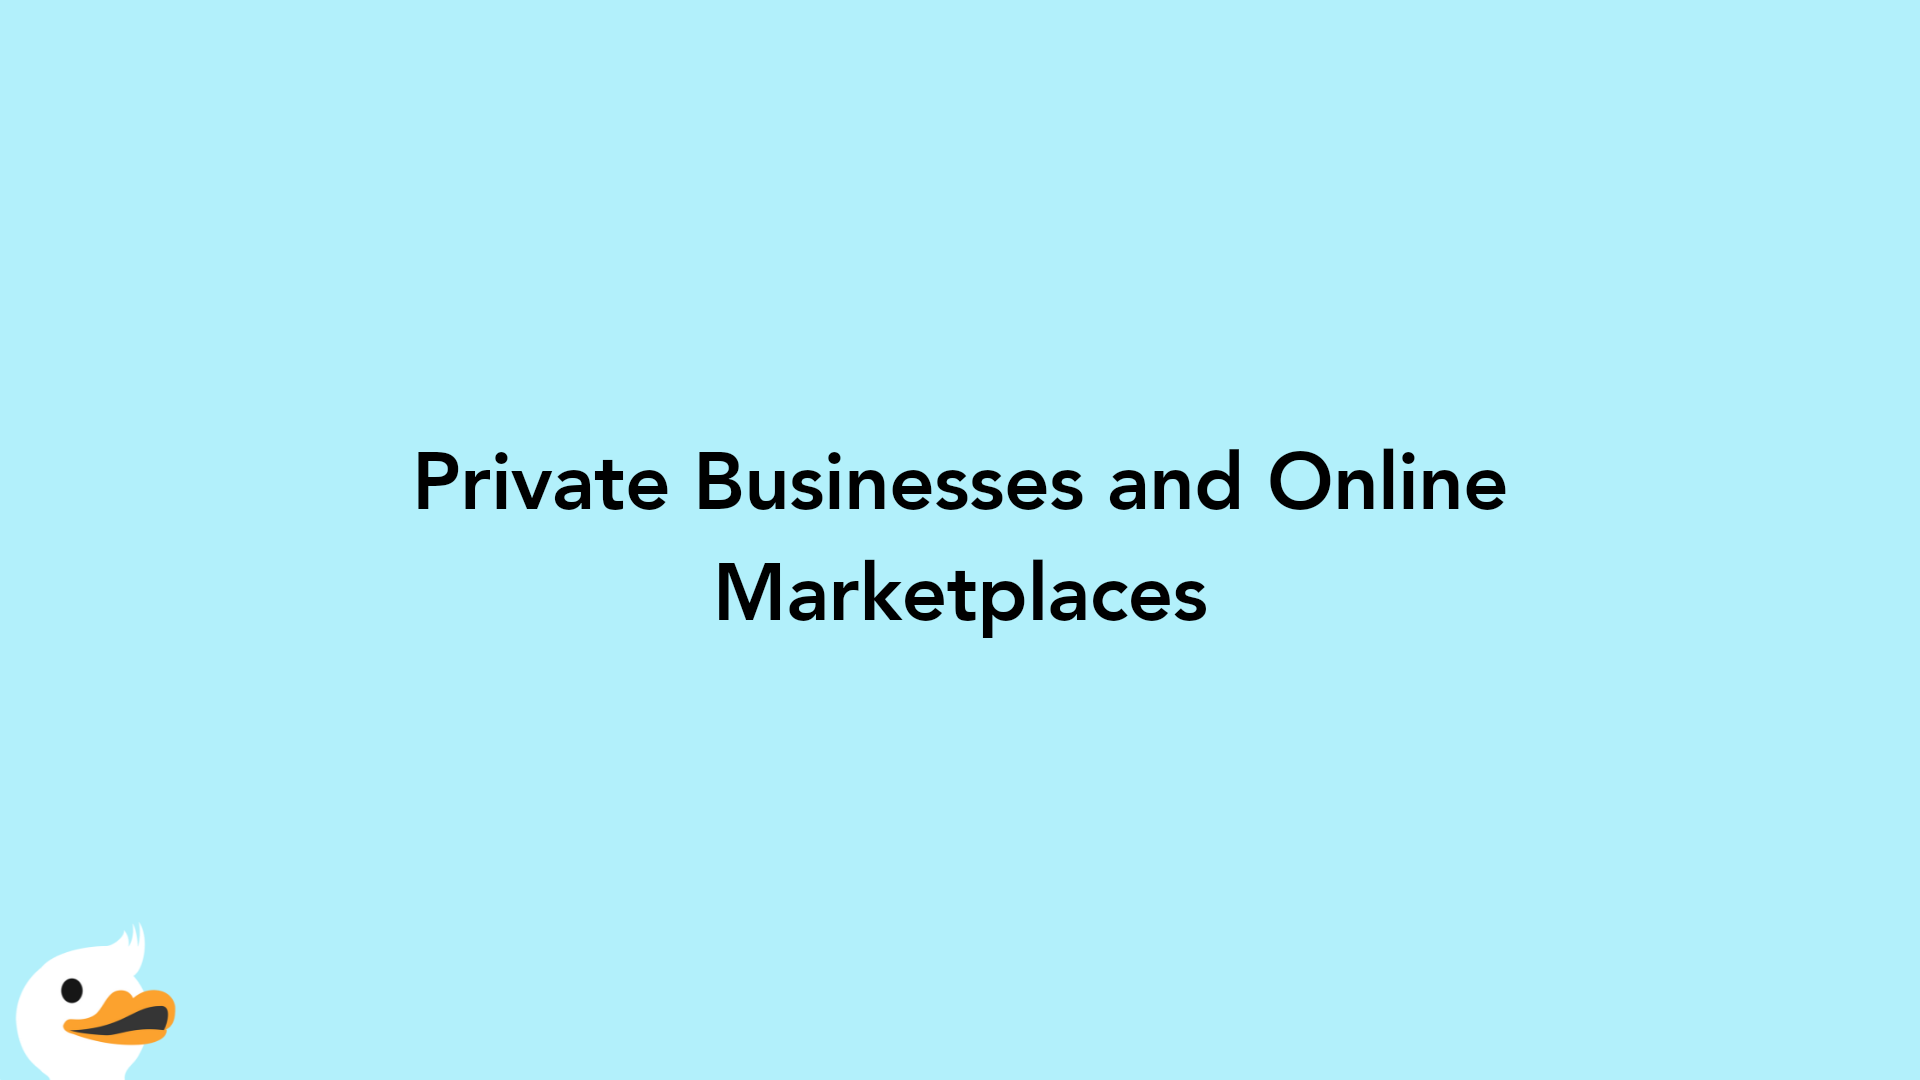 Private Businesses and Online Marketplaces